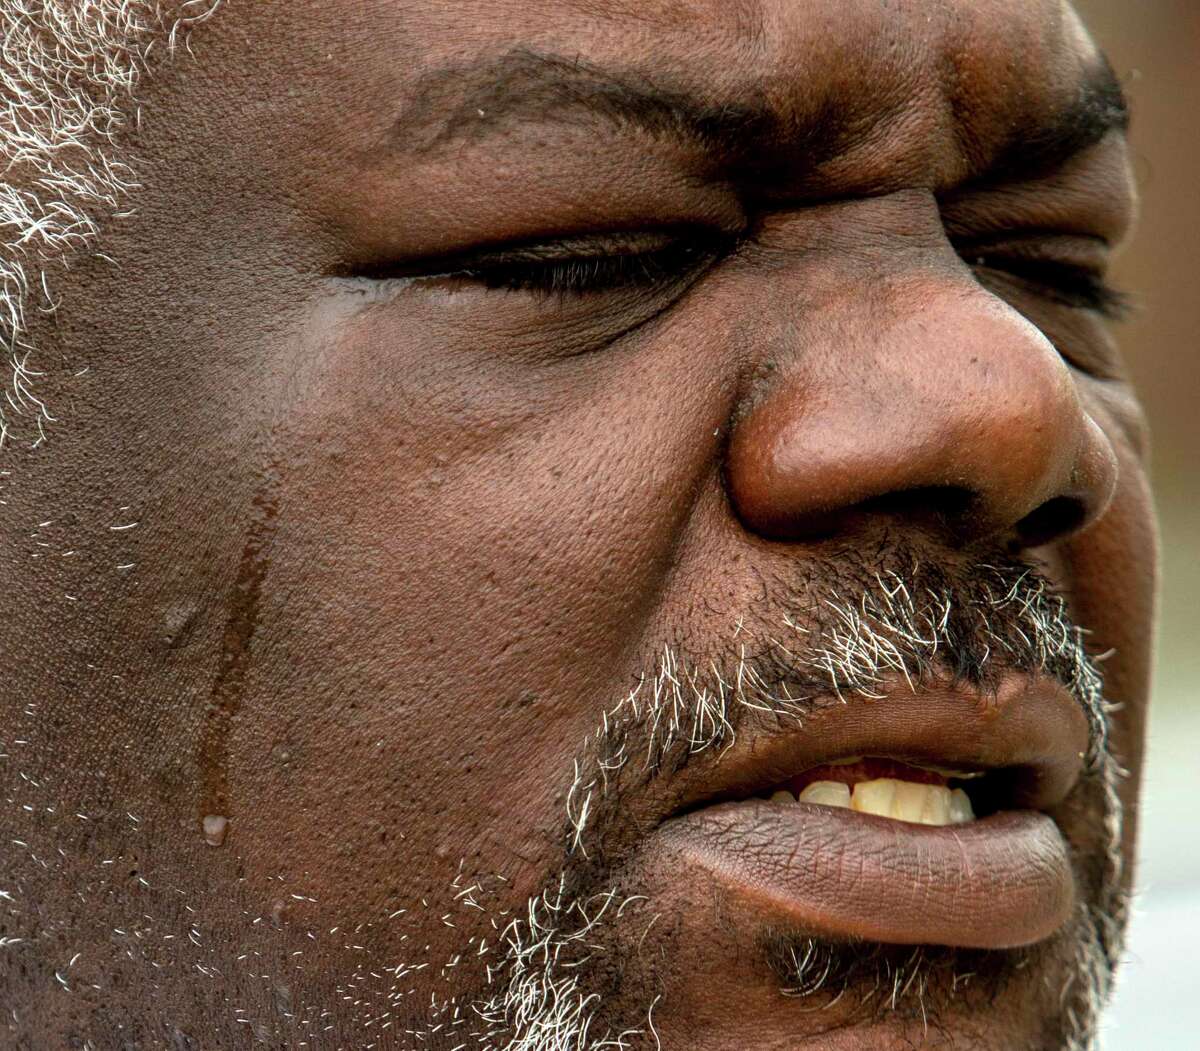 A tear rolls down Darrell Boyce’s cheek on Monday, April 4, 2022, as he talks to about 100 people who gathered at Phillis Wheatley Park to remember his son, Avante Boyce, 19, who was fatally shot near the park on March 31. Darrell Boyce is a prominent East Side anti-violence advocate.